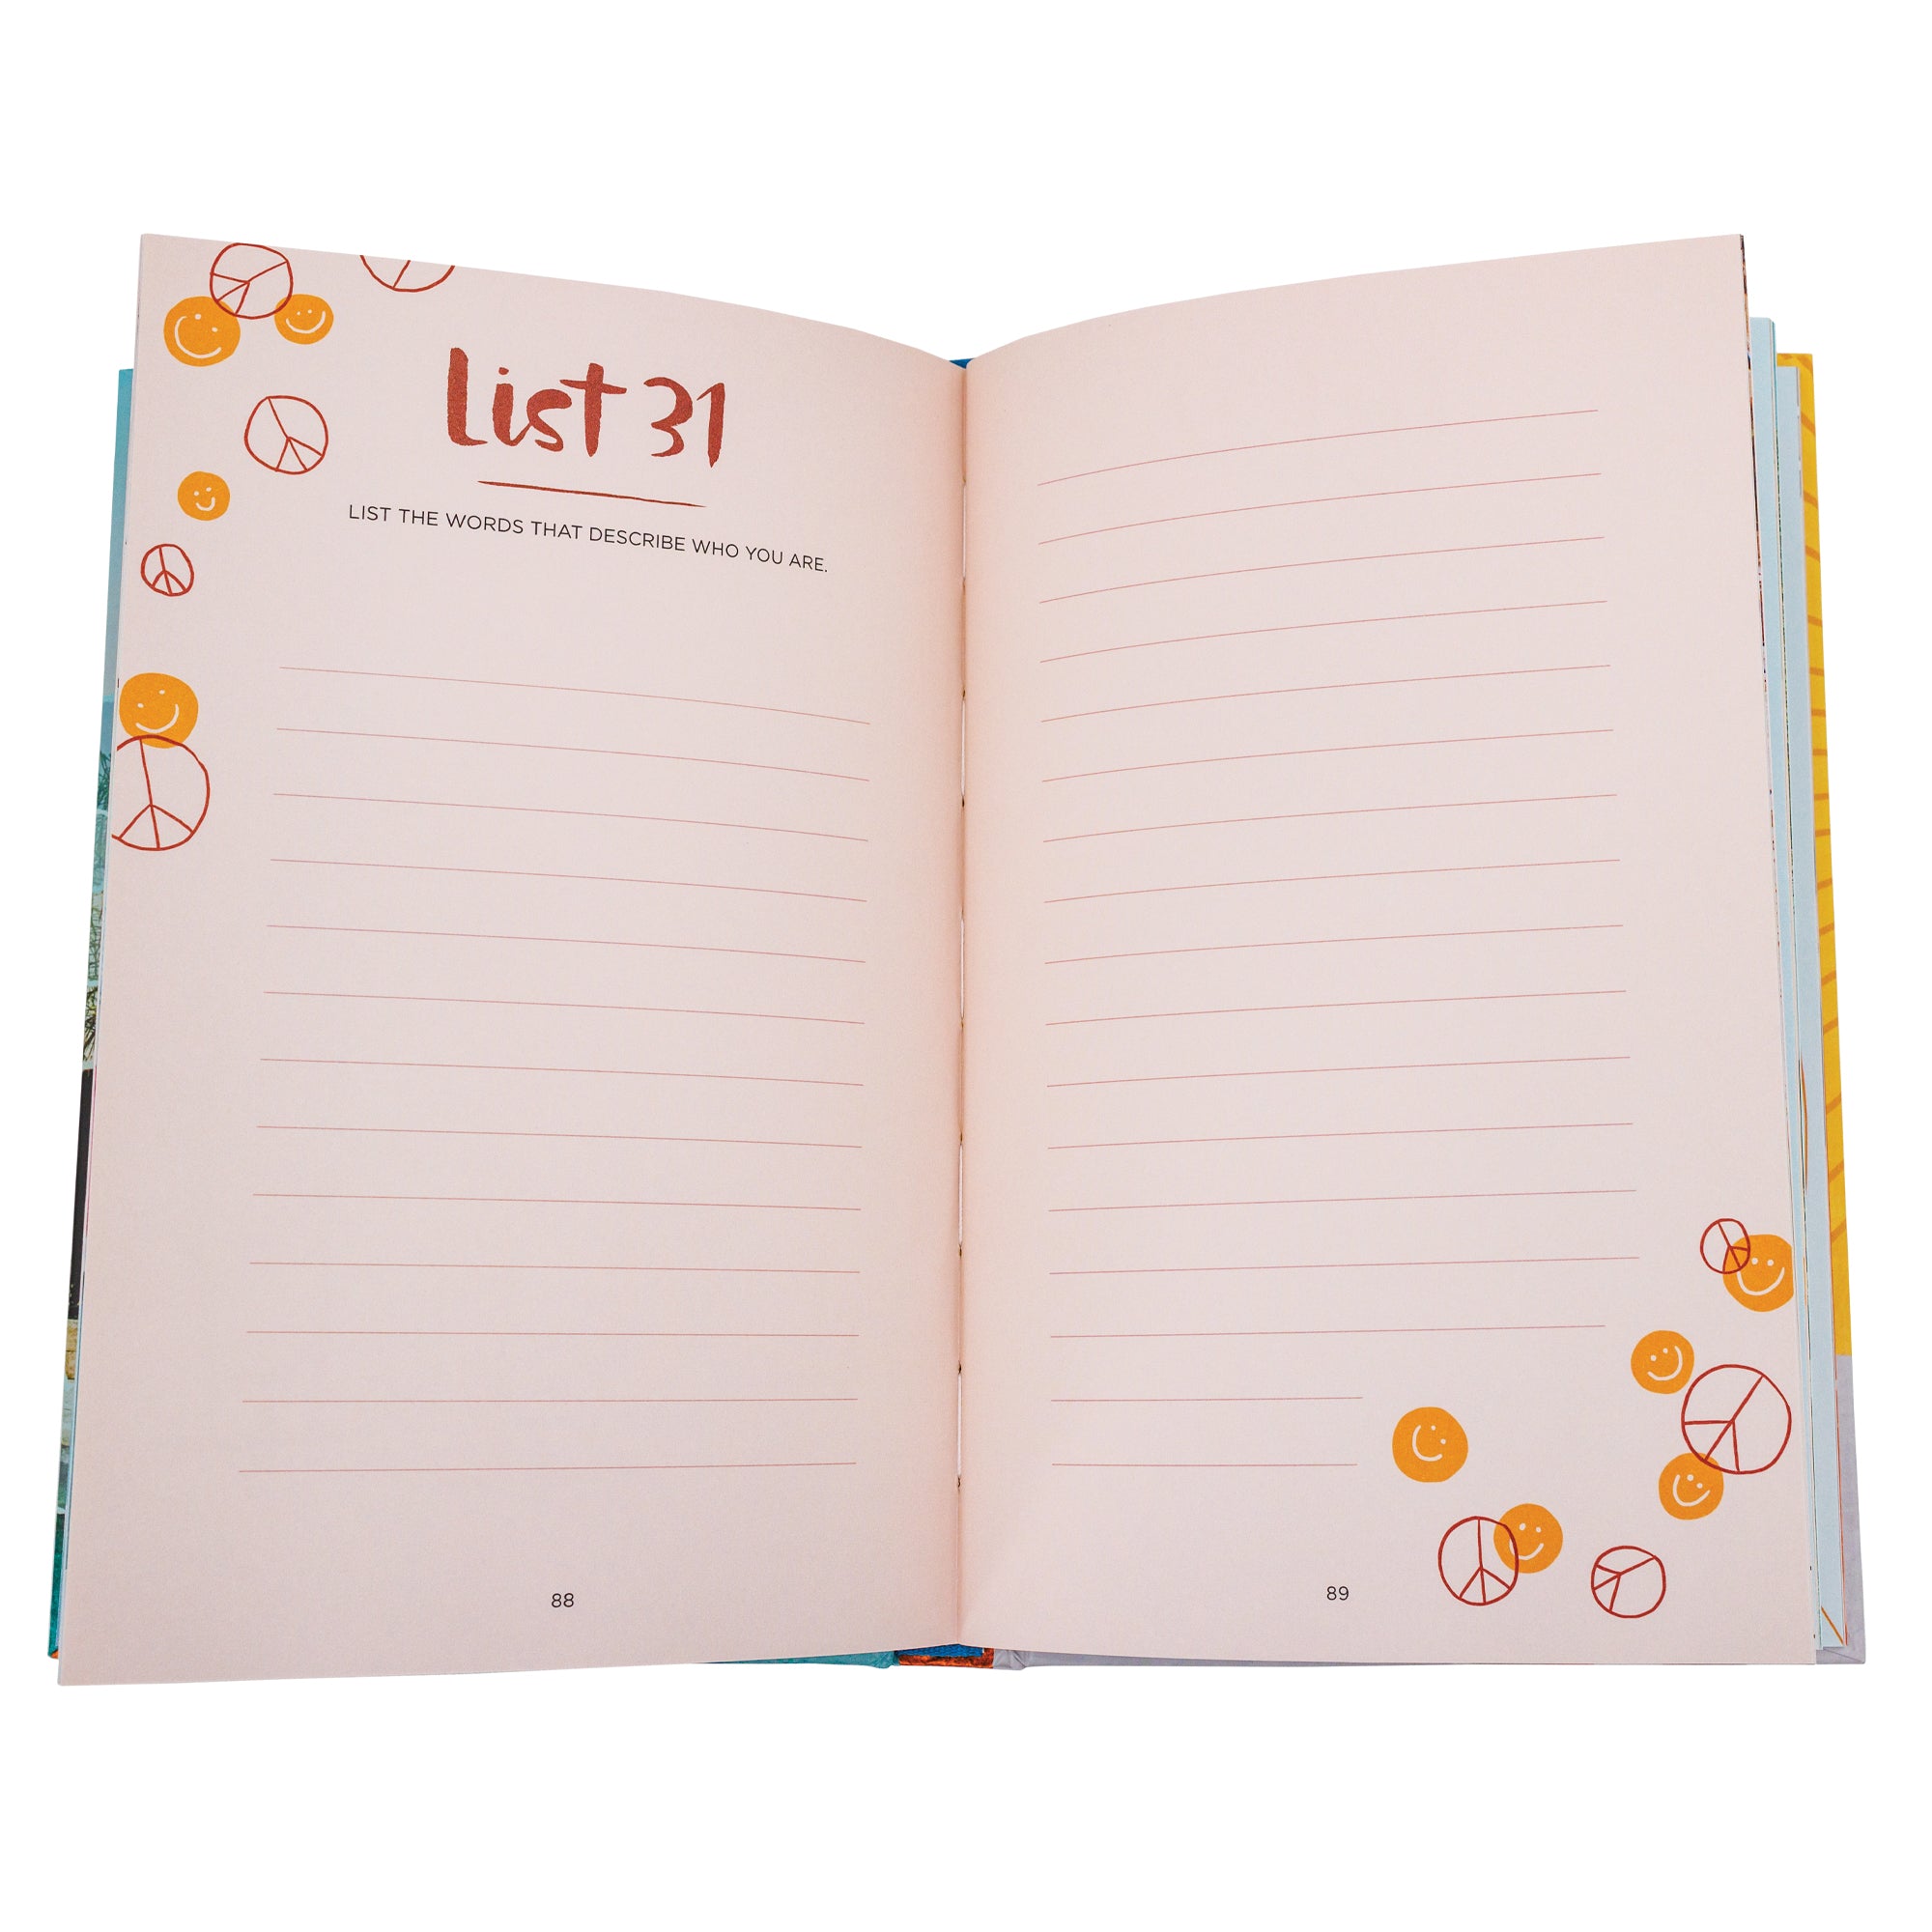 My 52 Lists Project book open to show 2 pages with empty lines for journaling. The background is a faint orange with peace signs and smiley faces in the upper-left and lower-right corner. The text reads "list 31, list the words that describe who you are."